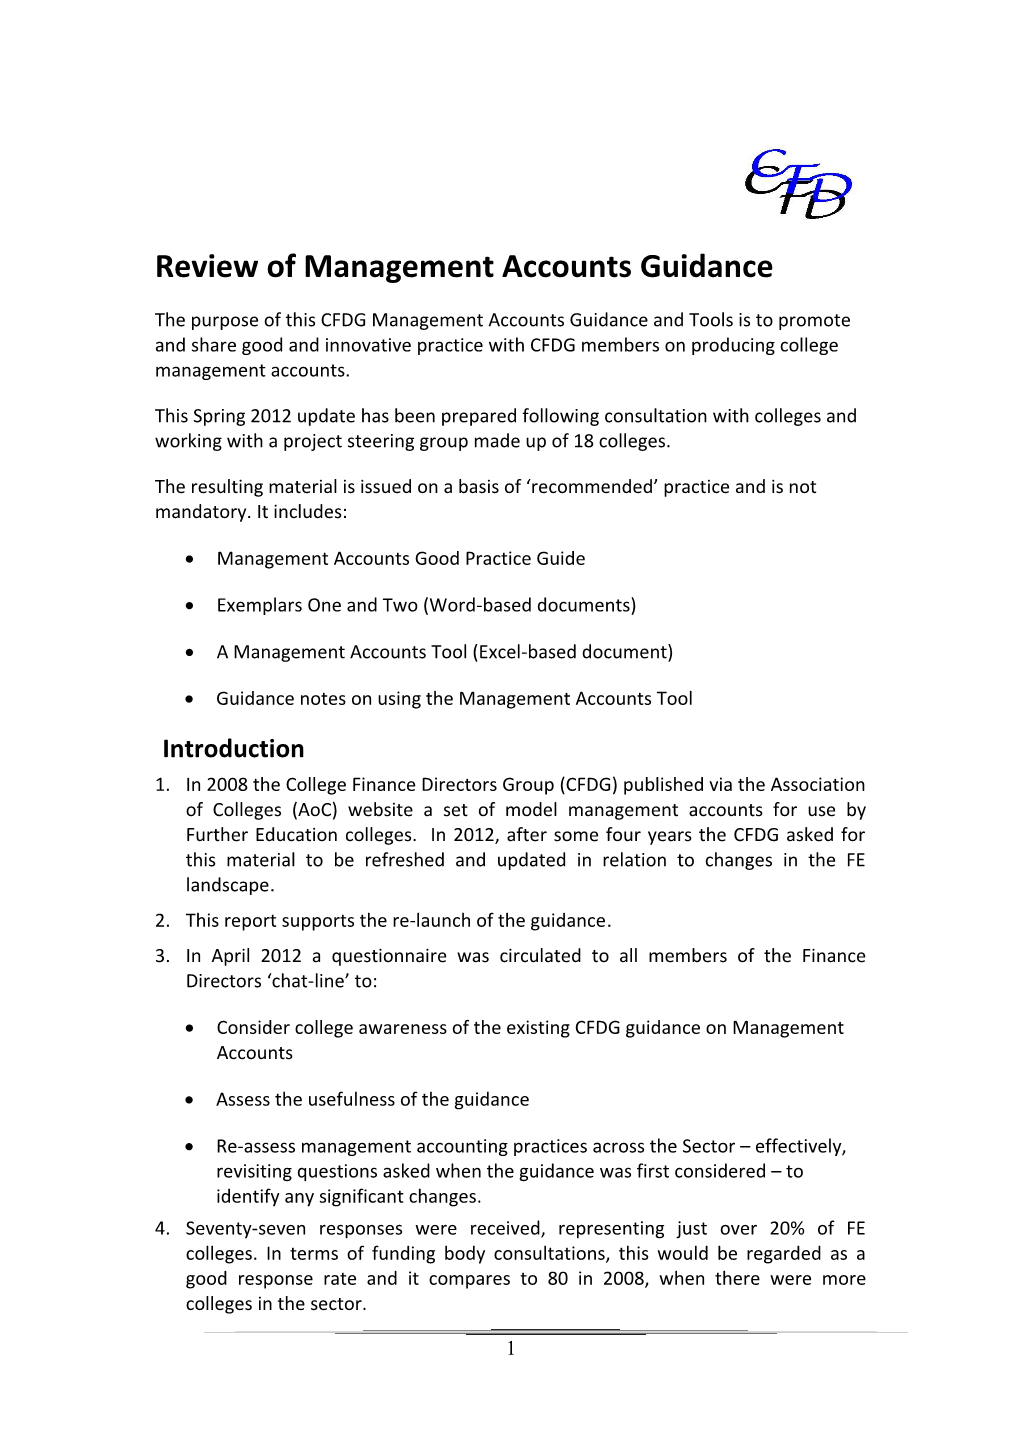 Guidance Notes on Completion of Management Accounts Model